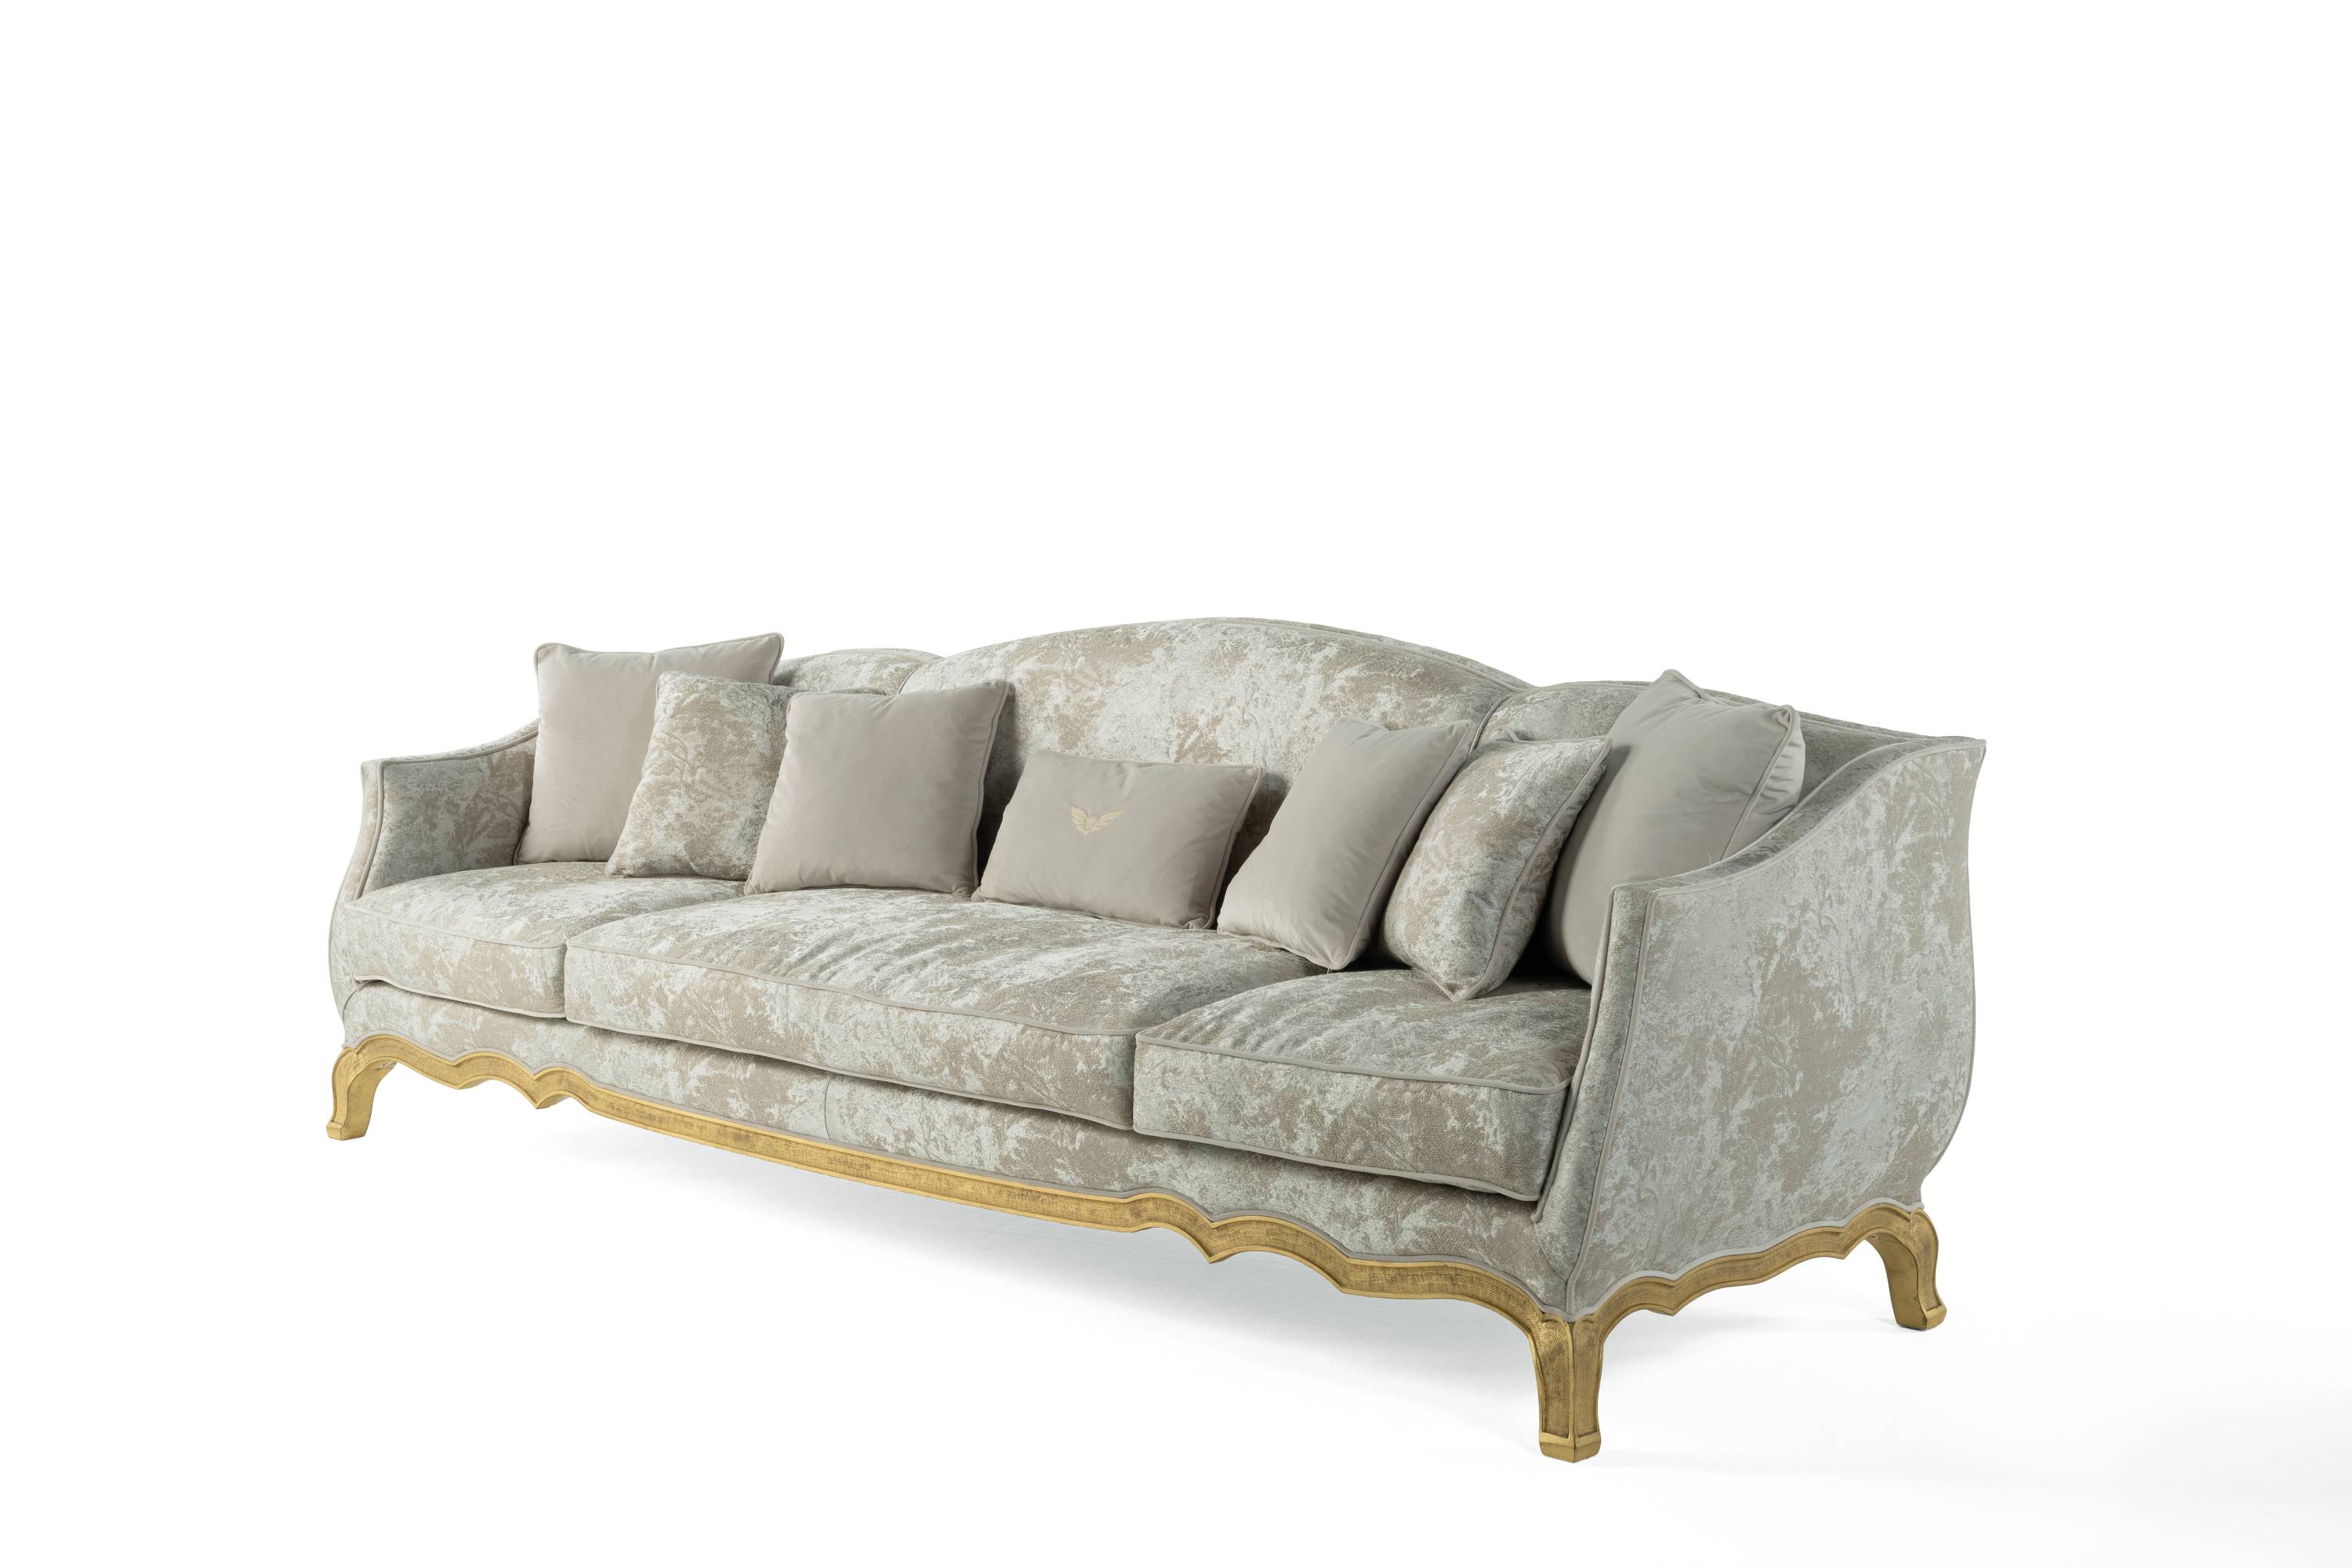 GRANDCAMÉE 2-seater sofa - 3-seater sofa – Transform your space with sophisticated Made in Italy classic sofas.